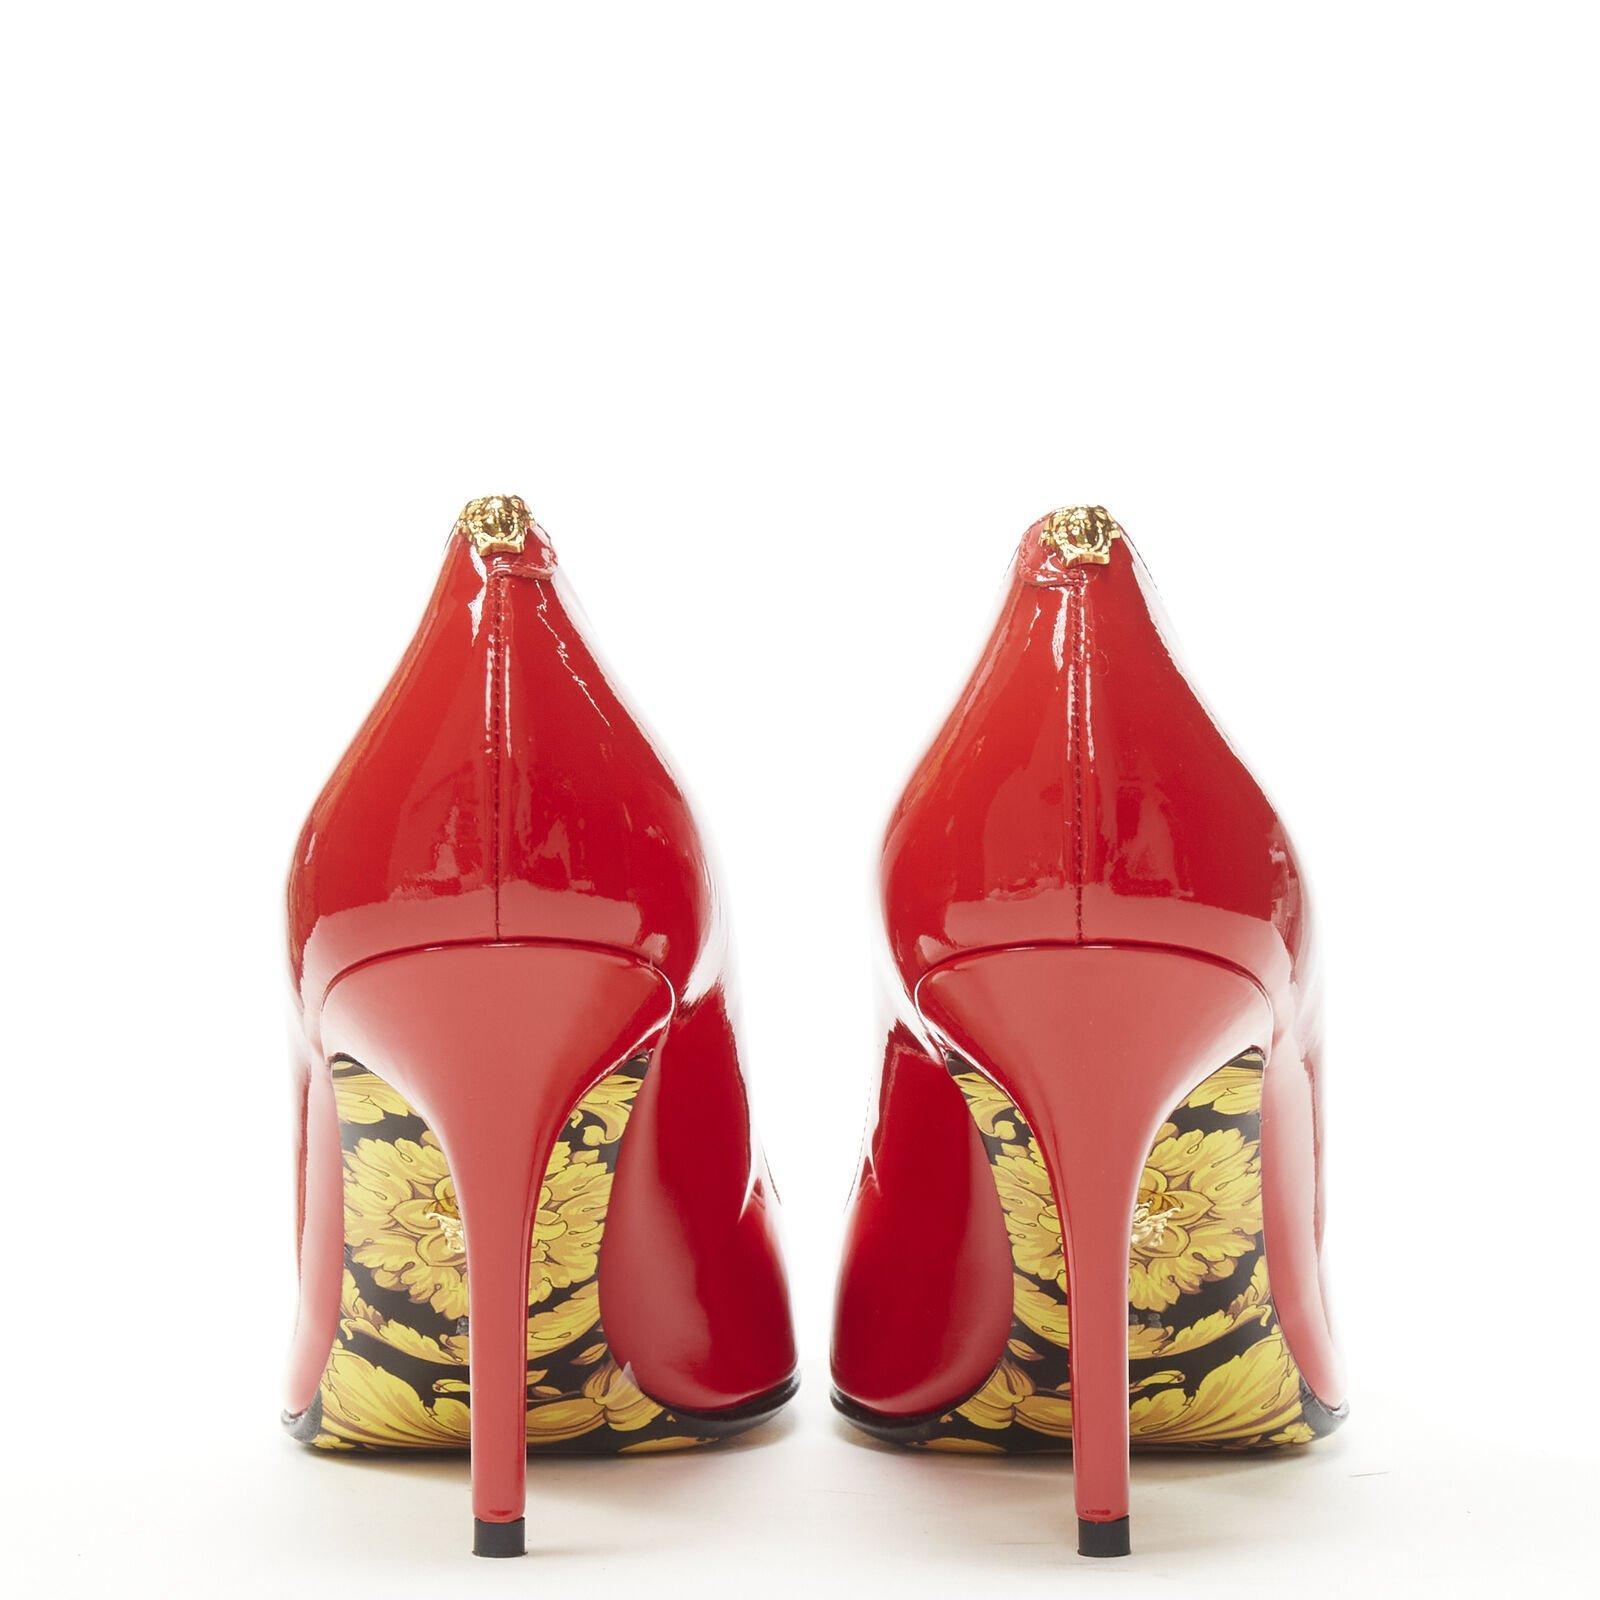 VERSACE Hibiscus Barocco gold sole red patent Medusa stud pump EU37.5 US7.5 For Sale 1